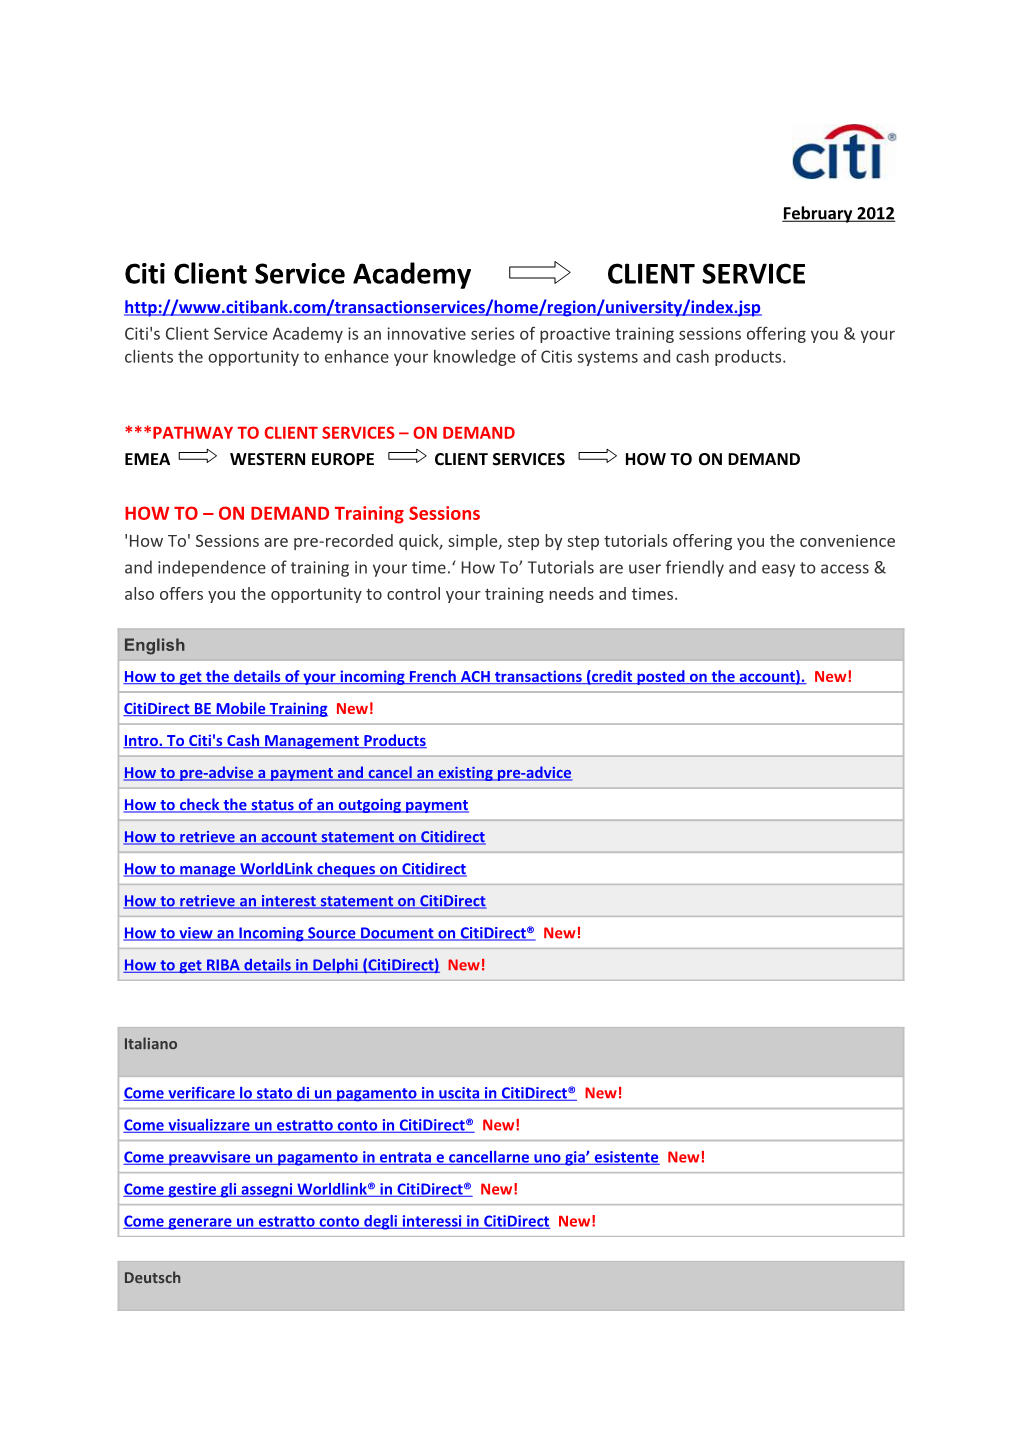 Pathway to Client Services on Demand